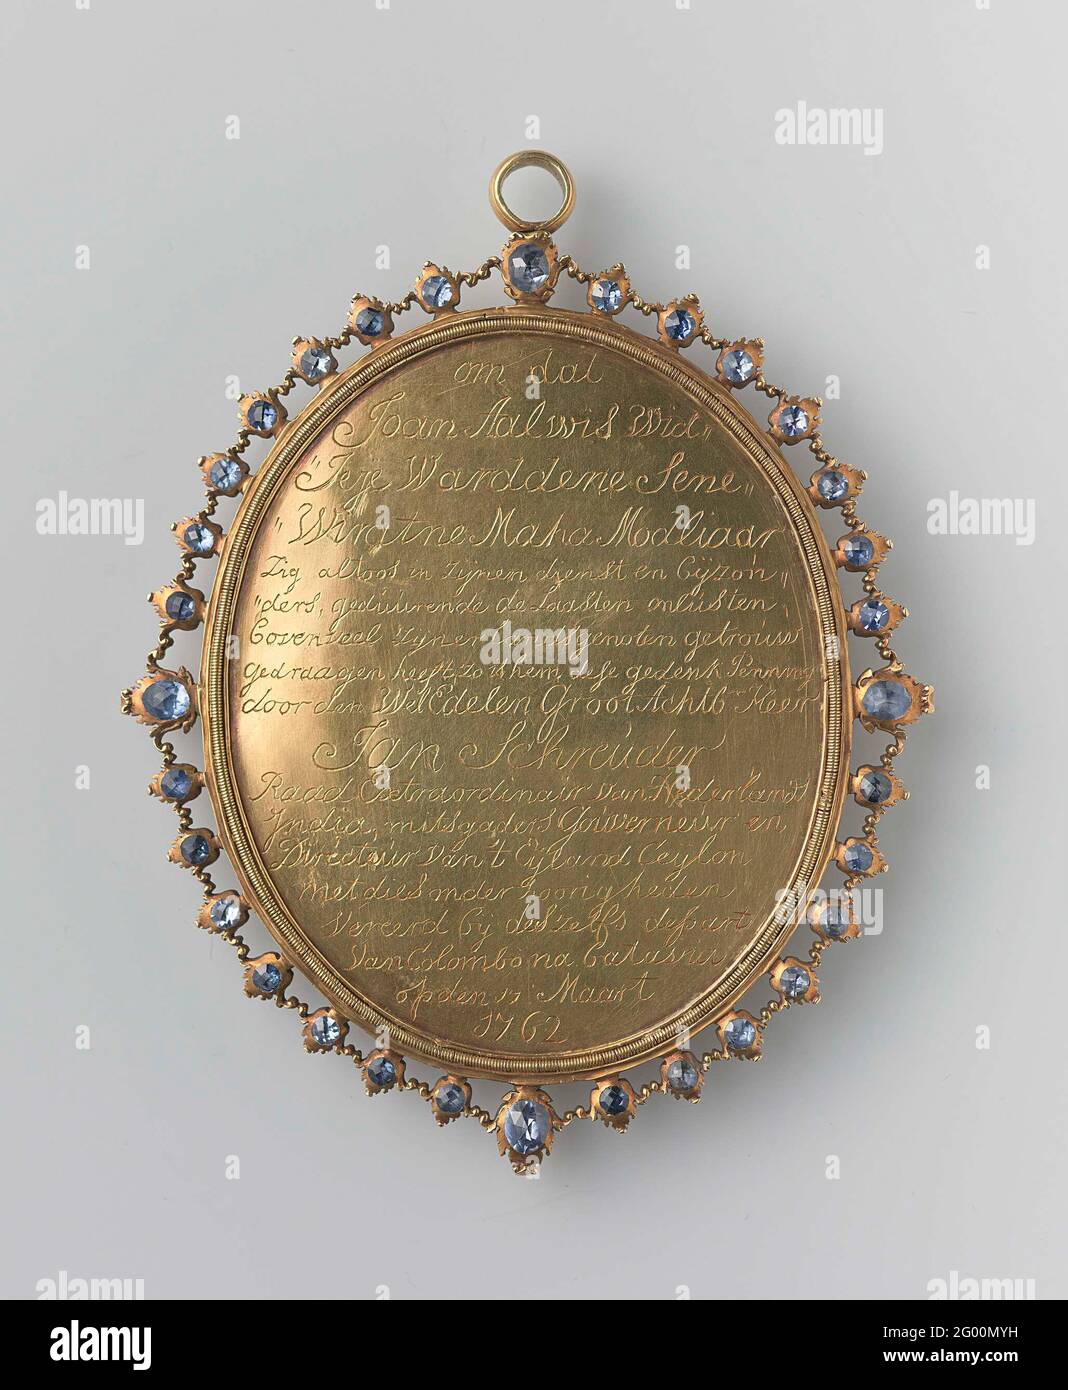 Gold medal of honour. The medal was given by Jan Schreuder, Governor of Ceylon, to Joan Aalwis, the highest-ranking Ceylonese employed by the Dutch East India Company (VOC), and the governor’s close adviser on Ceylon. He continued to promote the VOC’s interests during the war between the Dutch and the Kingdom of Kandy. The company thanks him for his loyalty ‘particularly during the recent disturbances’. Stock Photo